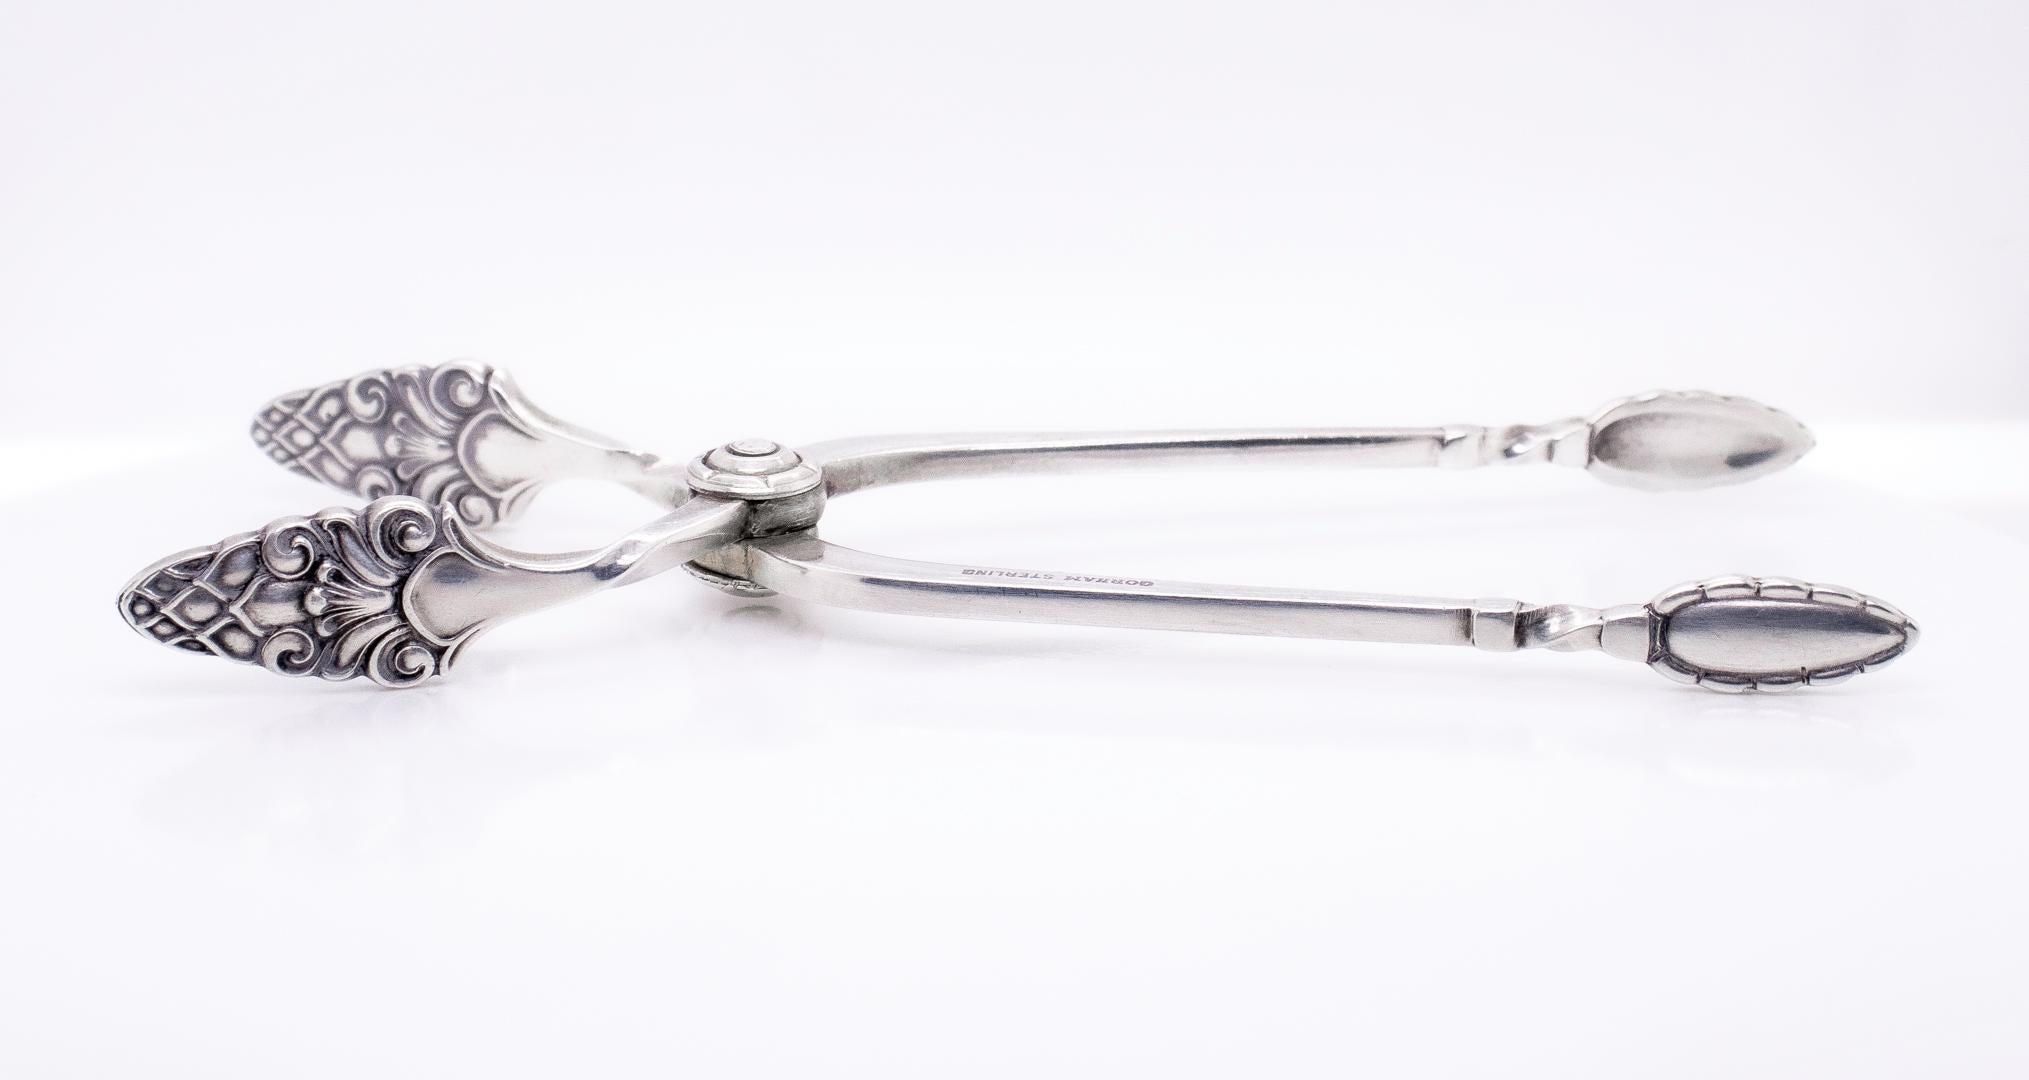 A fine pair of sugar tongs or nips. 

In sterling silver.

By the Gorham Manufacturing Co.

In the Old Sovereign pattern that appears to heavily lean on Georg Jensen designs (and particularly the Acorn pattern).

Monogrammed to on handle with a